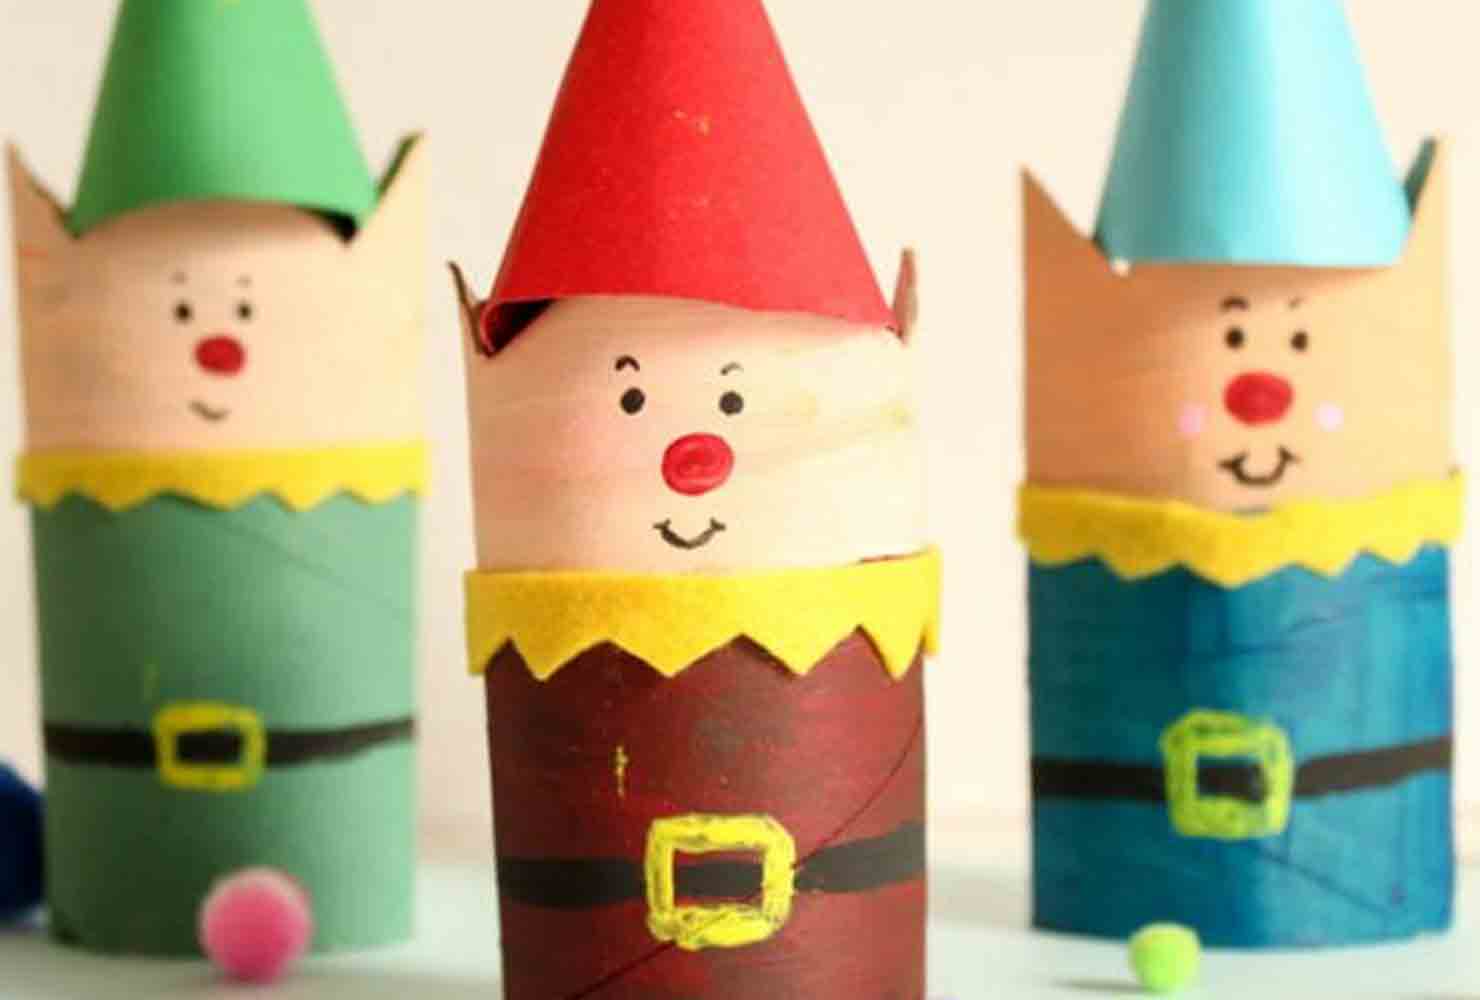  toilet paper roll craft to make it look like an elf